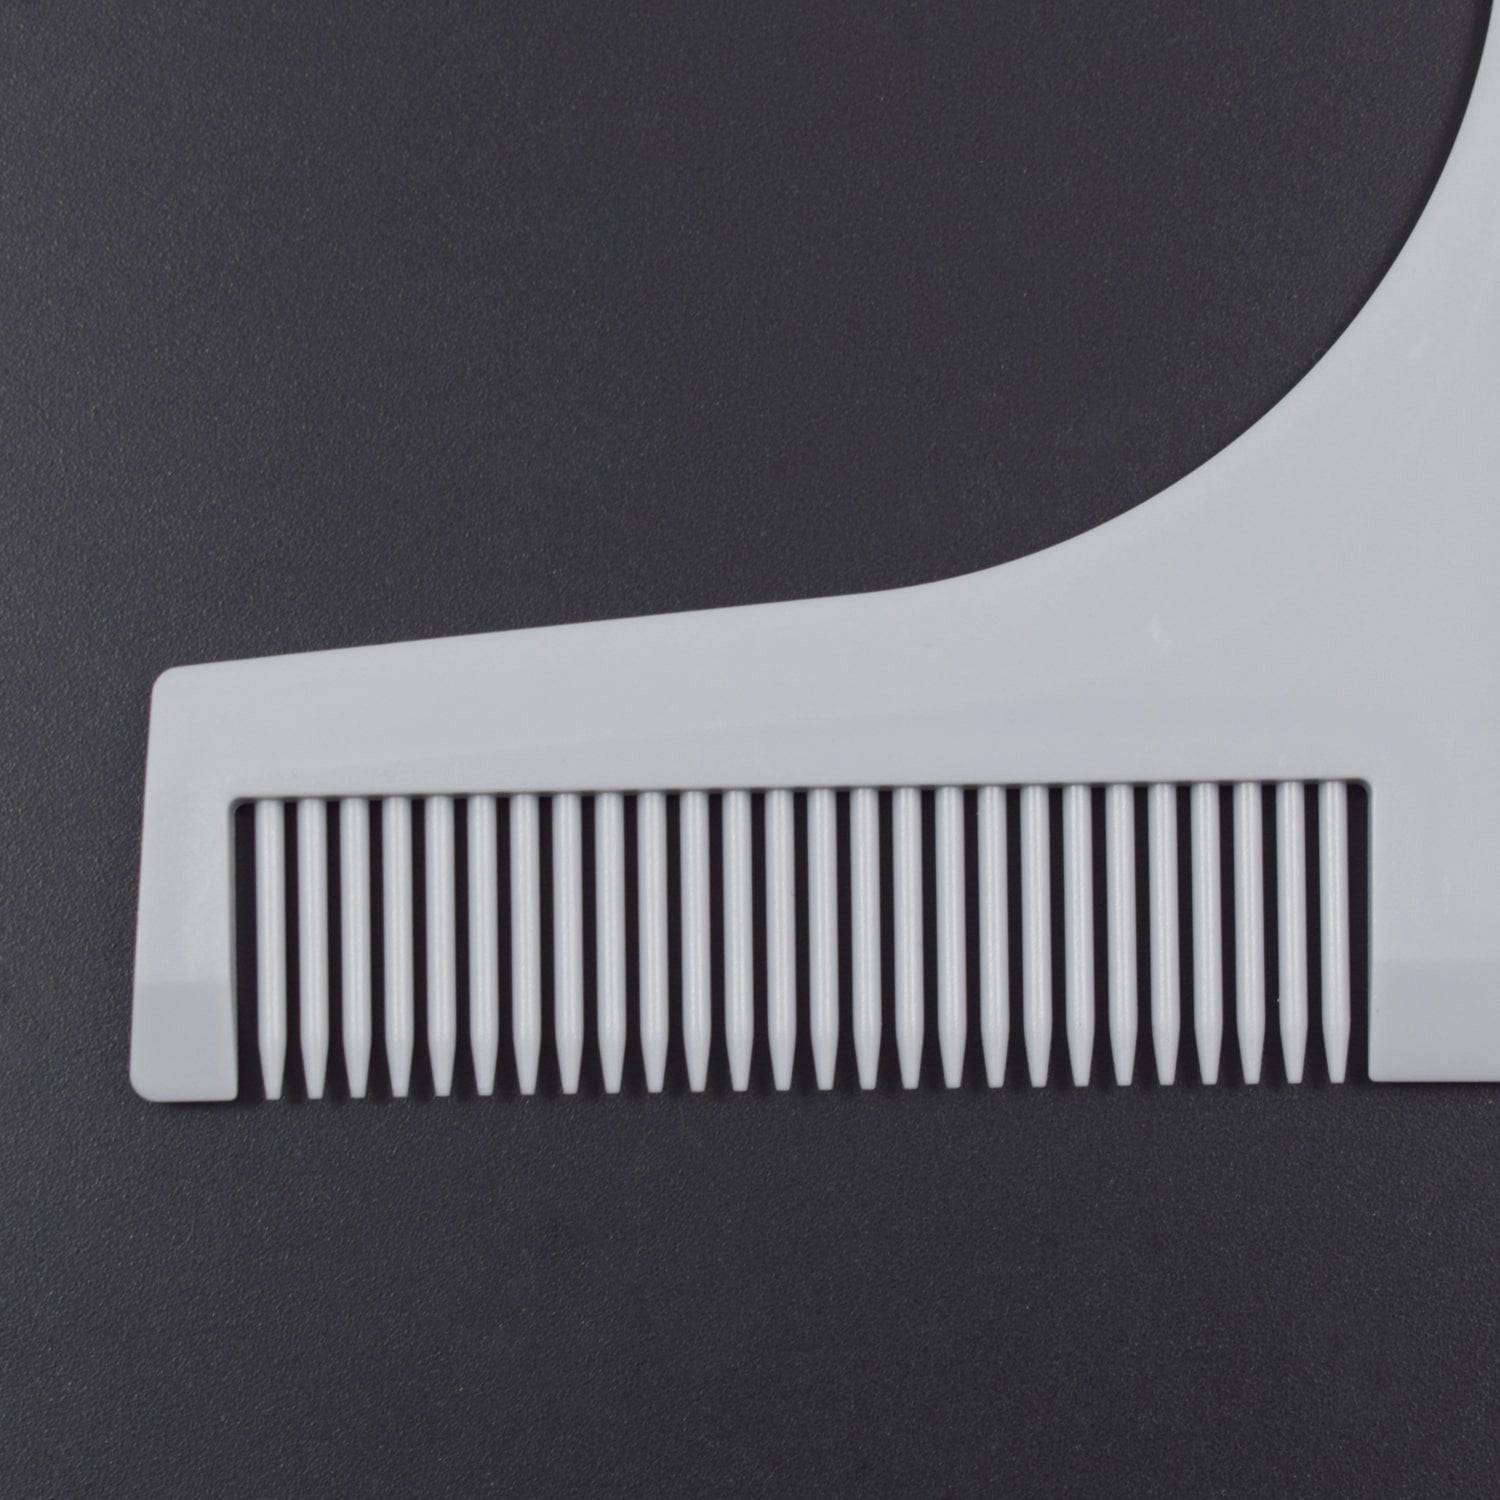 Beard Comb For Shaping And Styling-Premium Quality Beard Template With Inbuilt Comb (Color may vary) - RS1996 - REES52